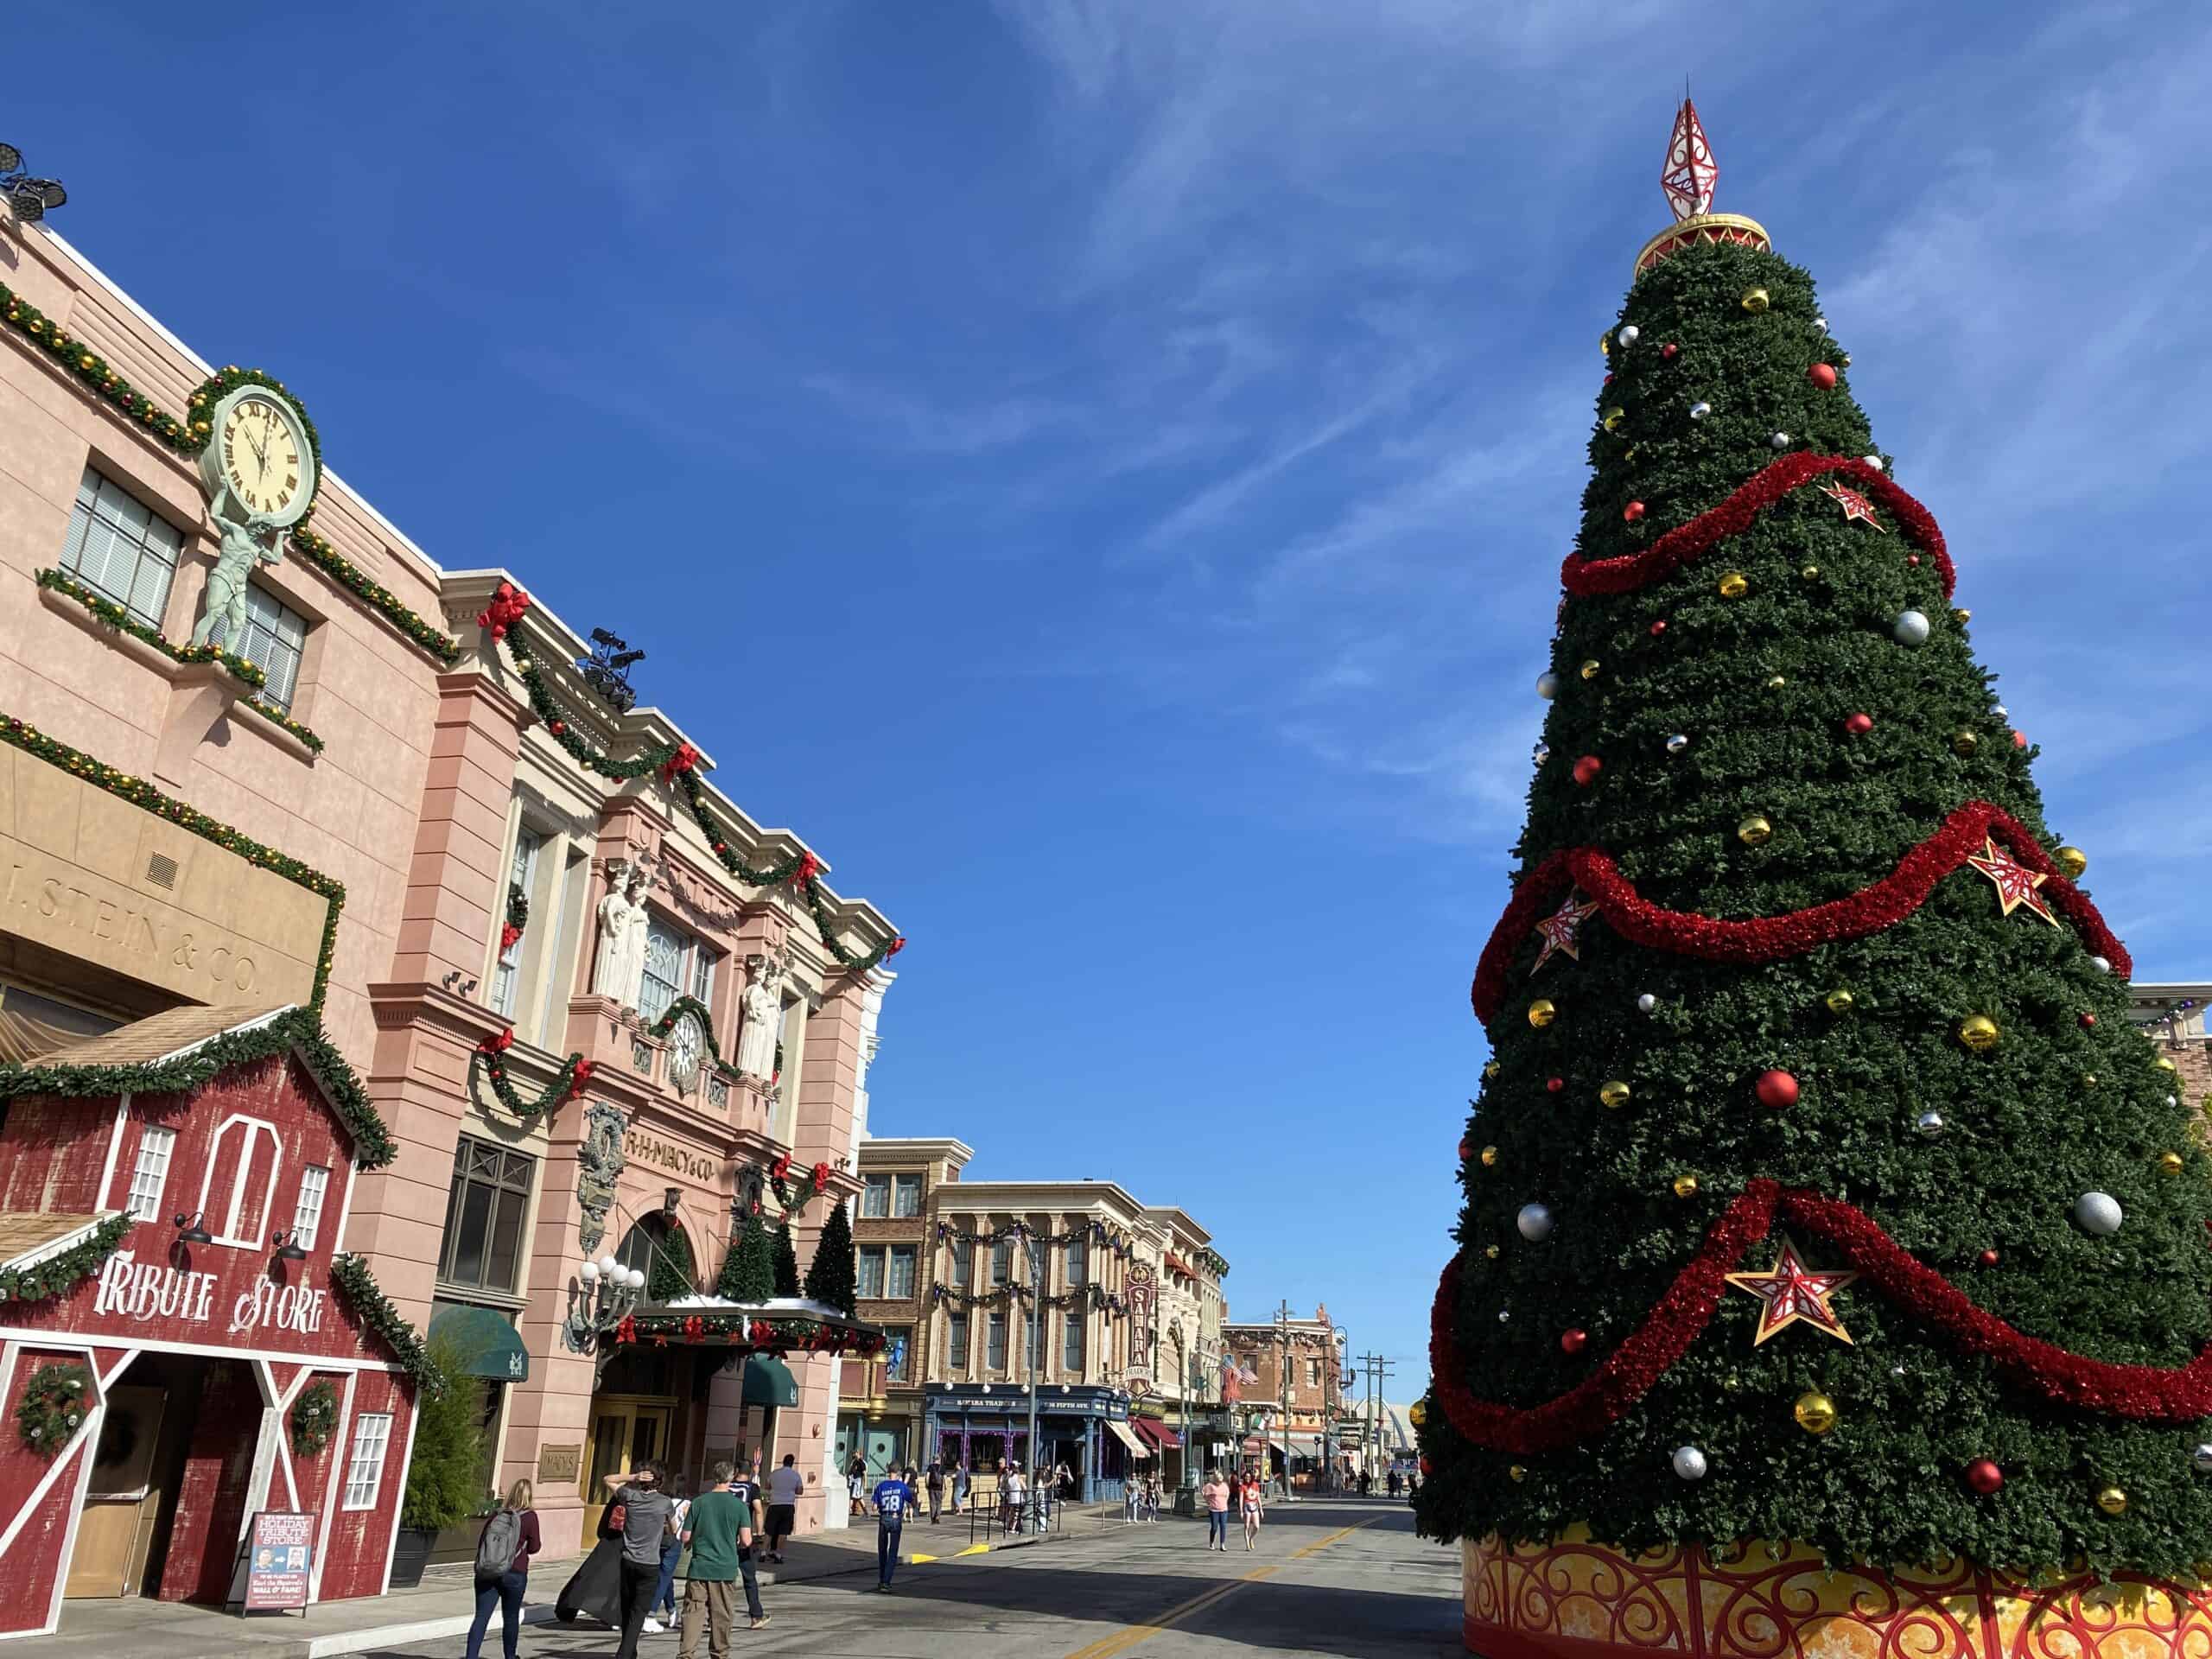 Towering Christmas Tree in New York Area Universal Studios. The large Christmas tree has red garland and red and colored ornaments, and stands tall in the right side of the photo. Large buildings and the Holiday Tribute Store are in various red colors and stand to the left of the photo. The bright blue sky is above the tree and the buildings, with just a few thin clouds